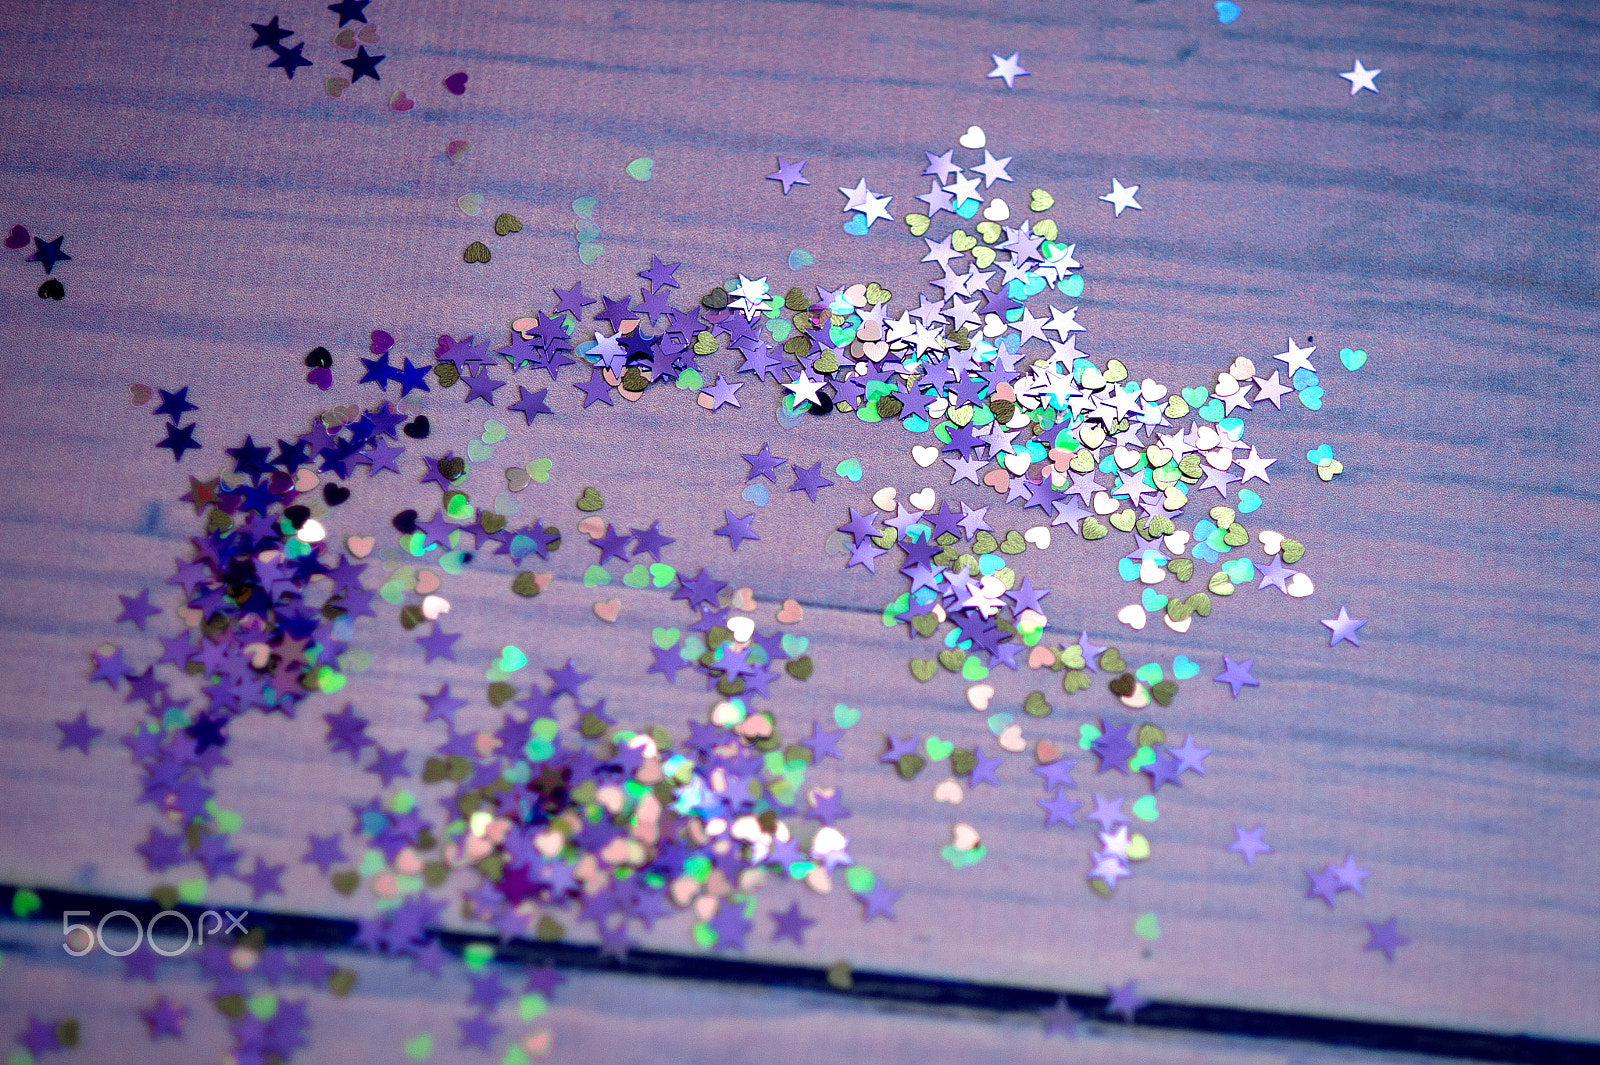 Nikon D700 sample photo. Colorful confetti in the shape of a heart in front of purple background photography